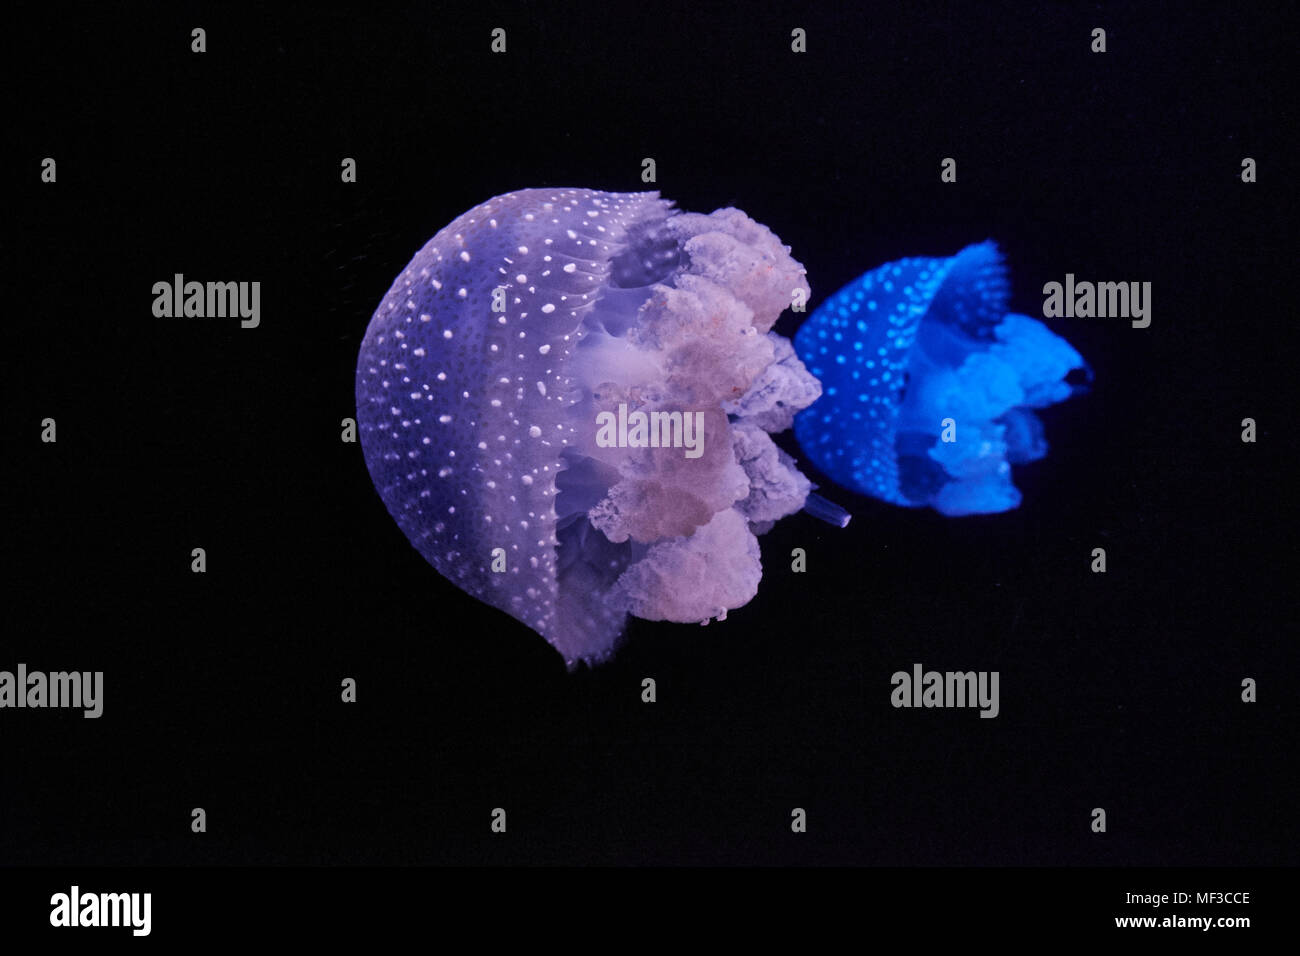 Blue and purple shining jellyfishes in front of black background Stock Photo